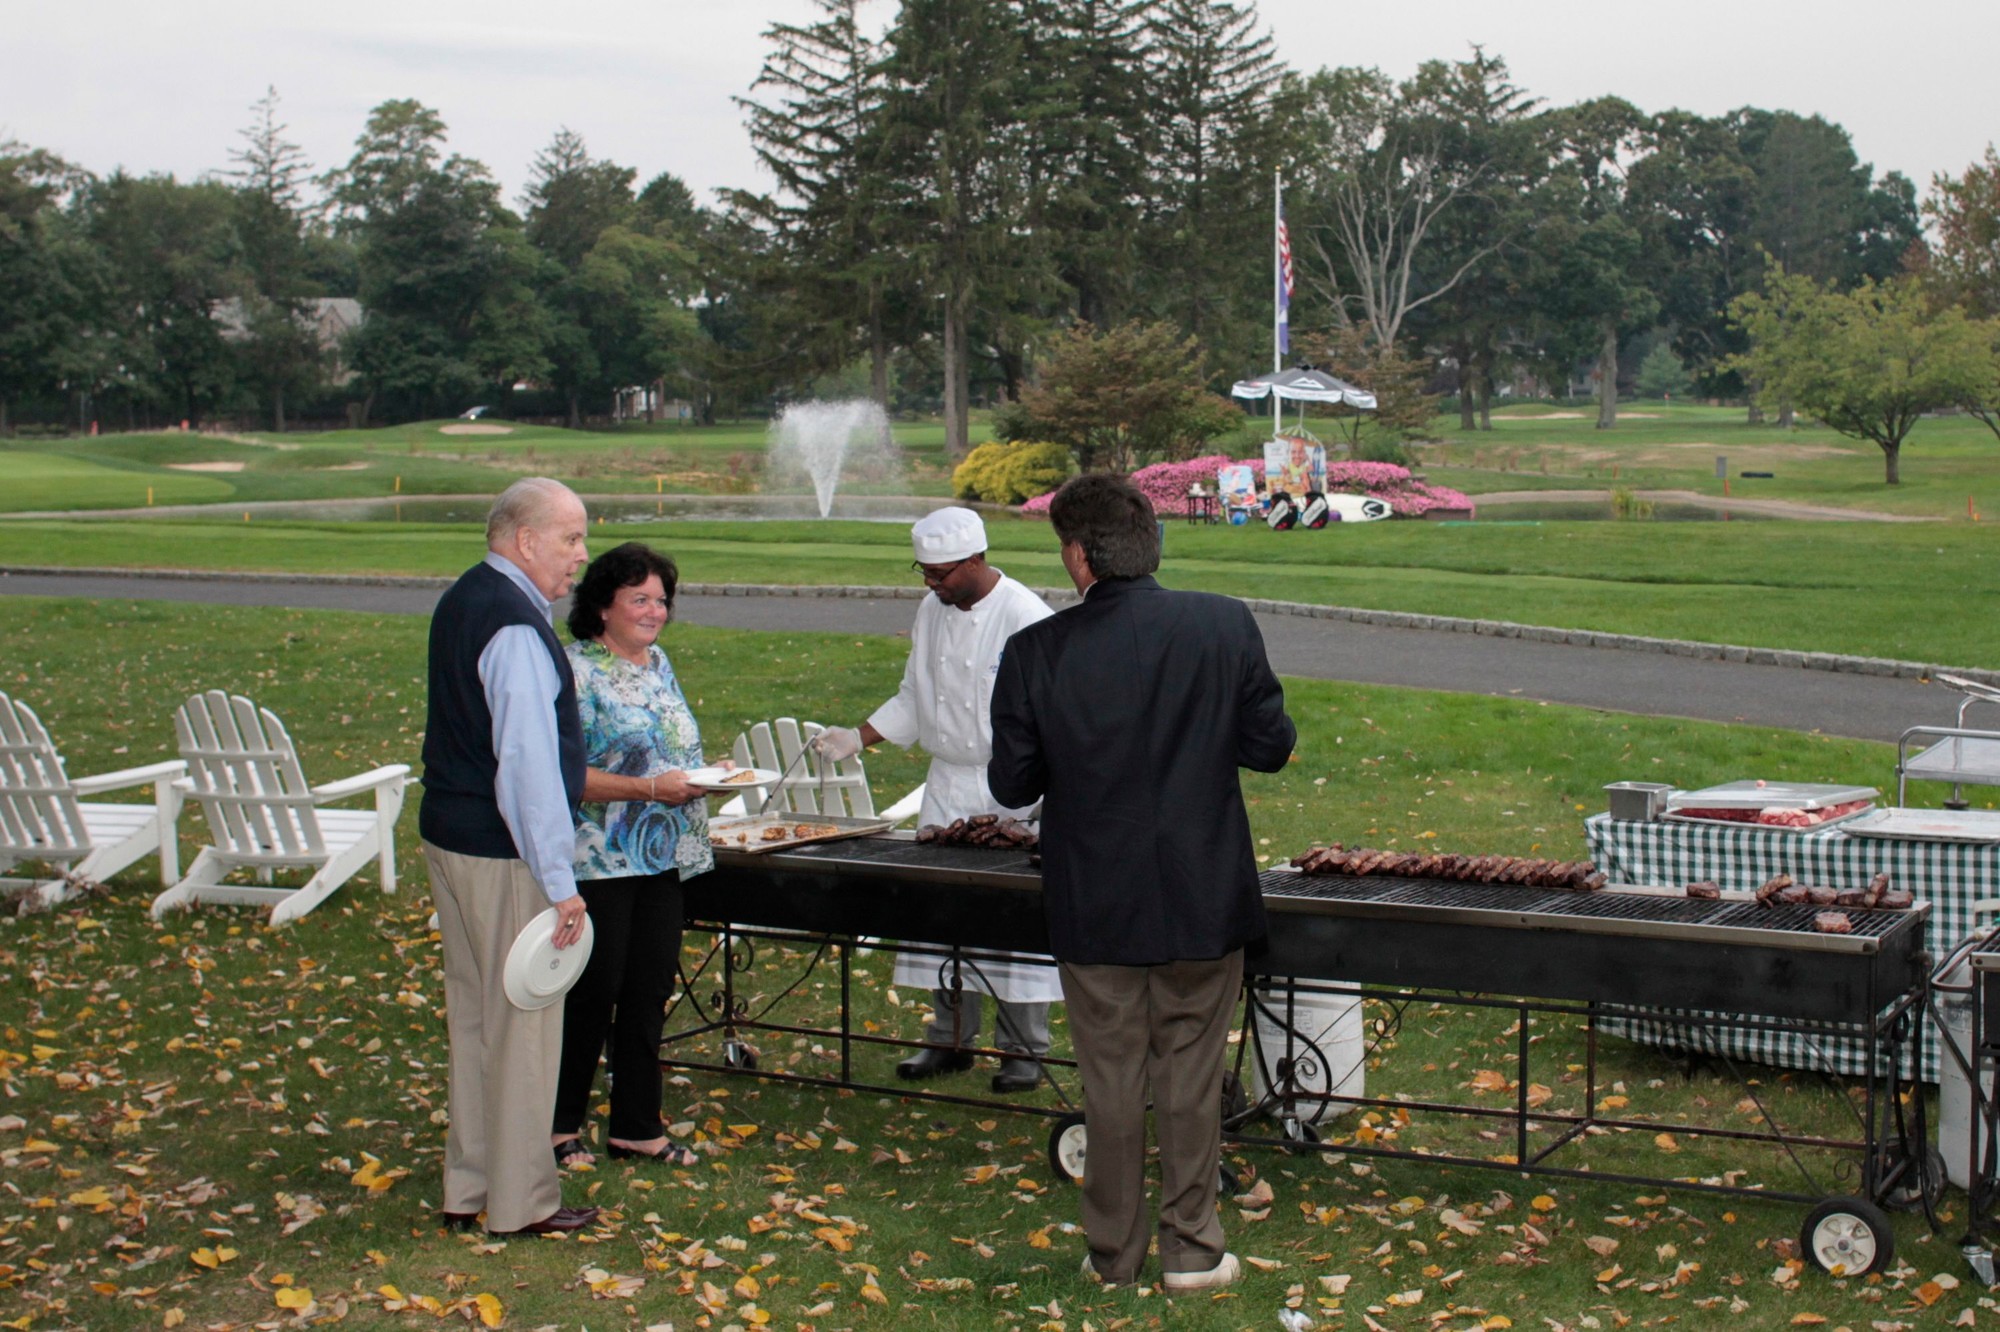 Guests enjoyed some fresh barbecue prepared by the chefs at the Links.